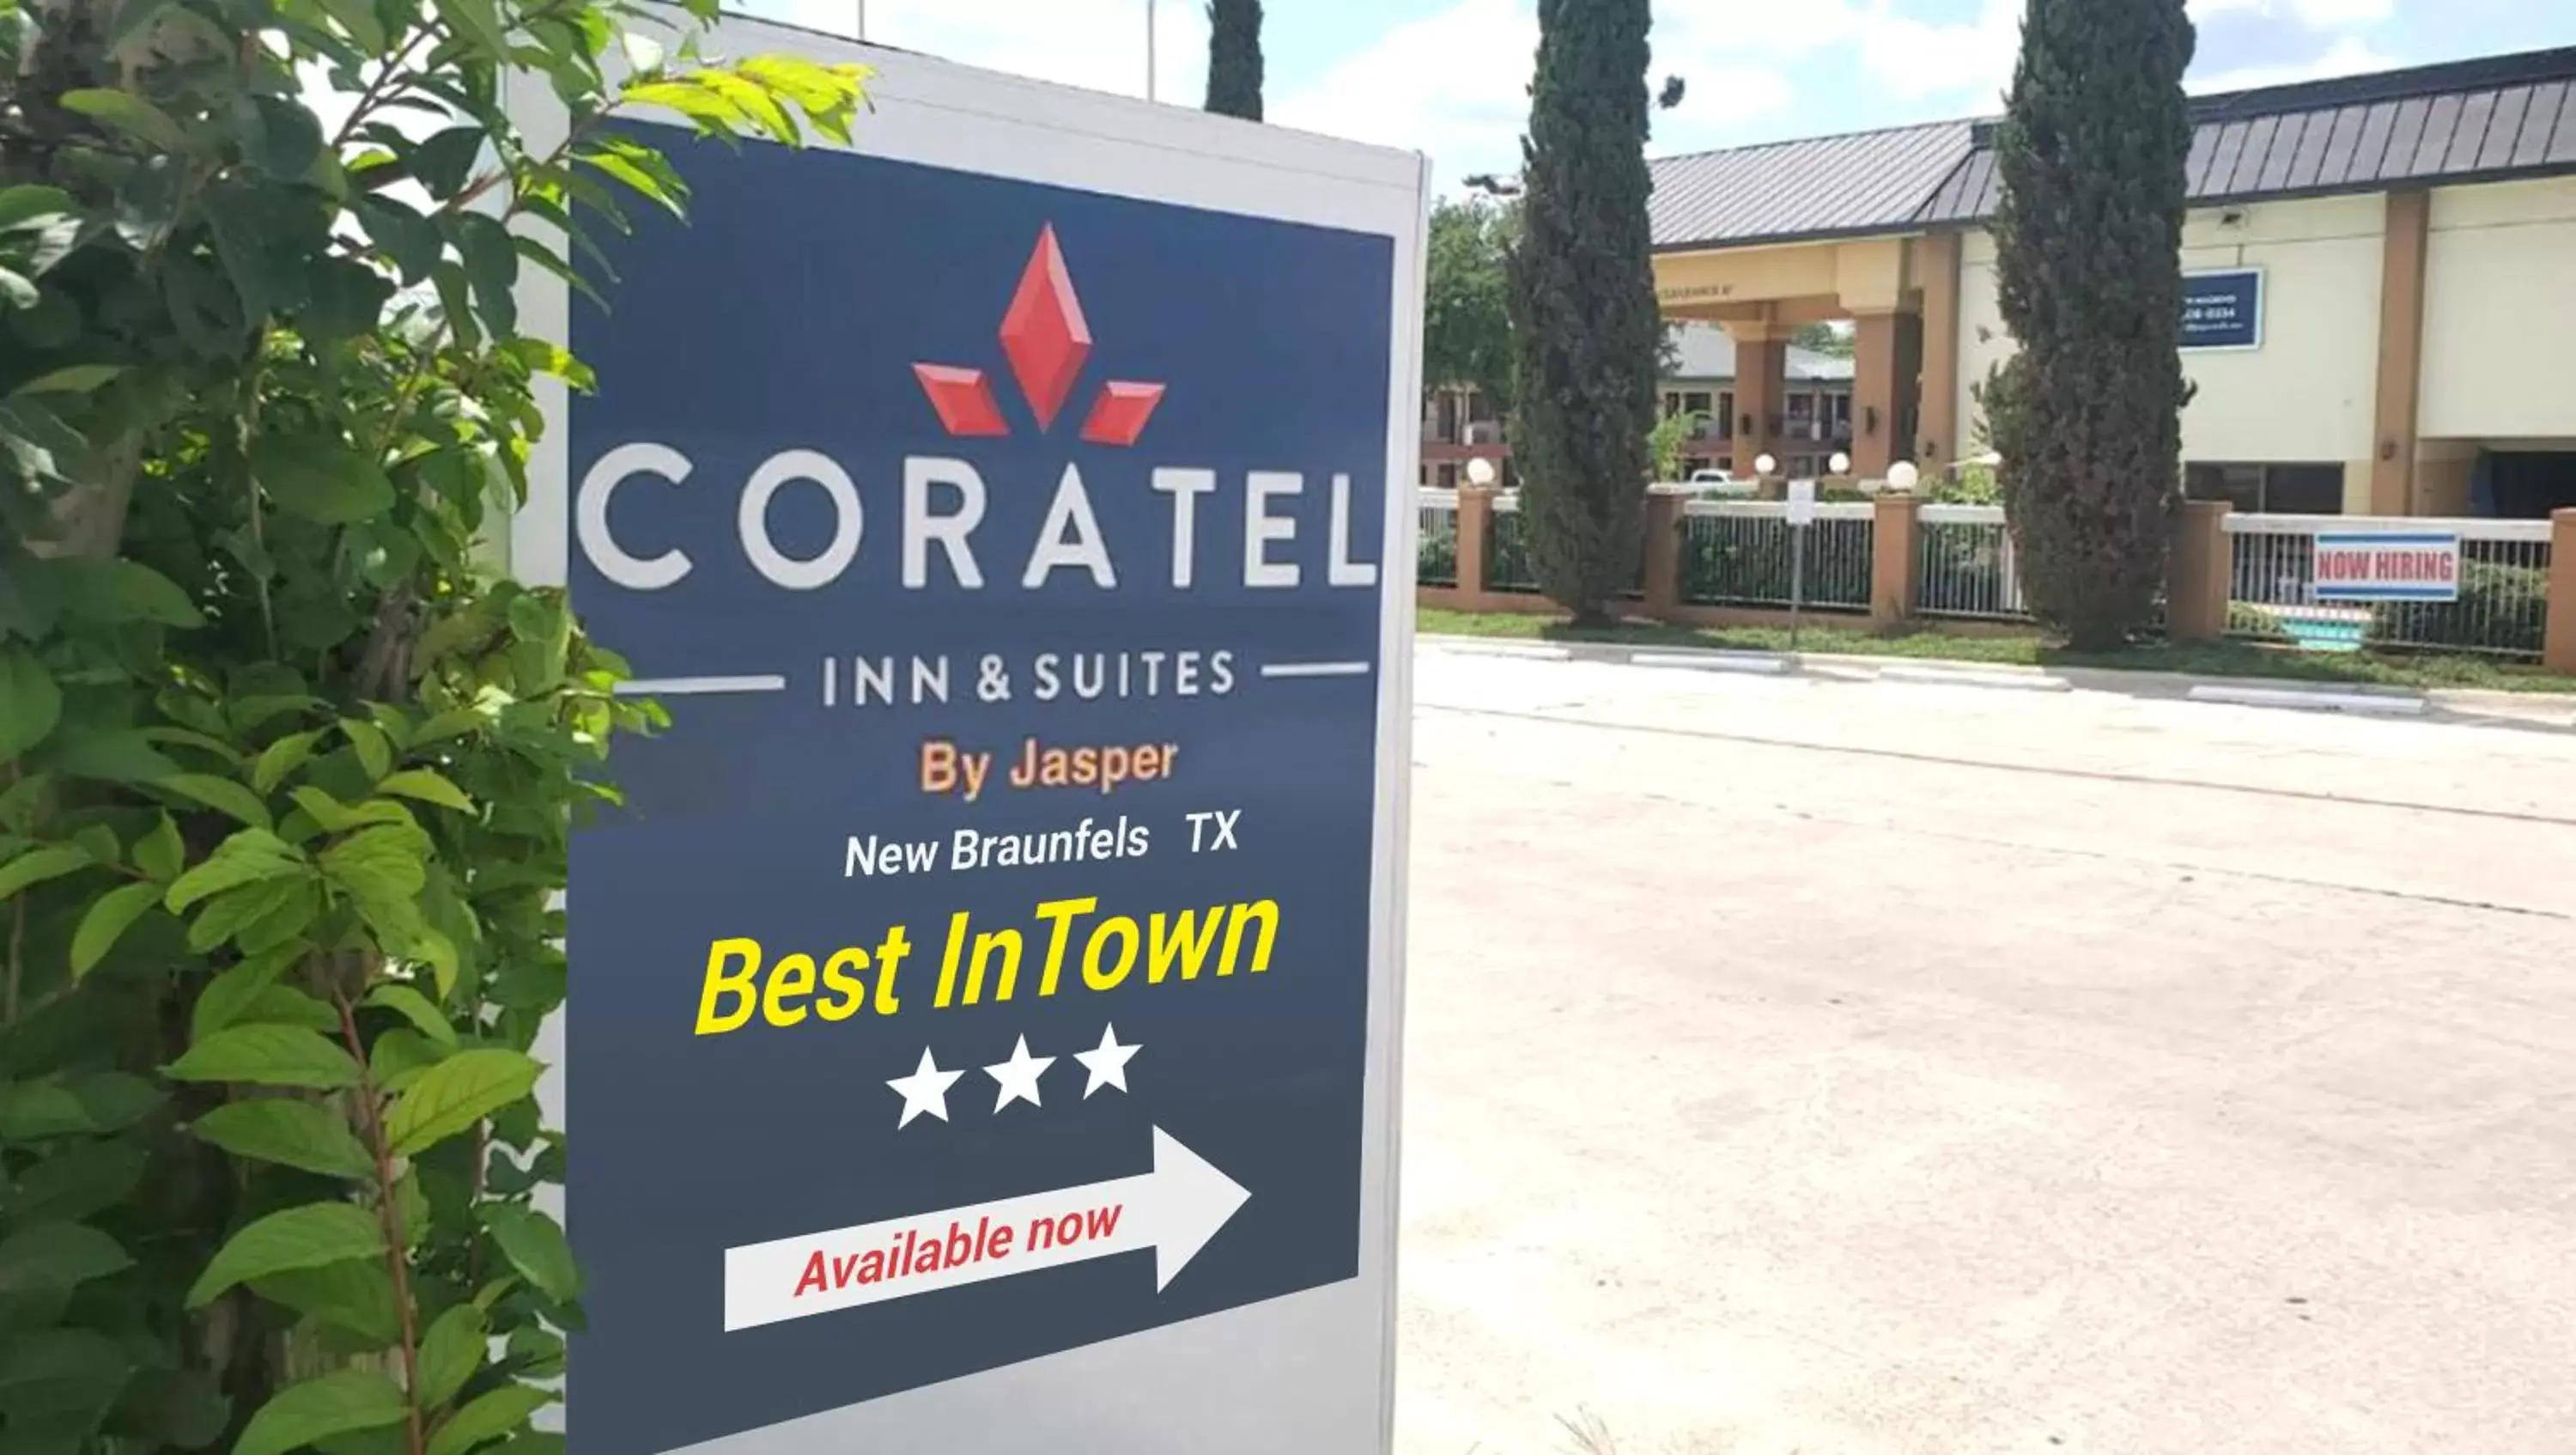 Property building in Coratel Inn & Suites by Jasper New Braunfels IH-35 EXT 189